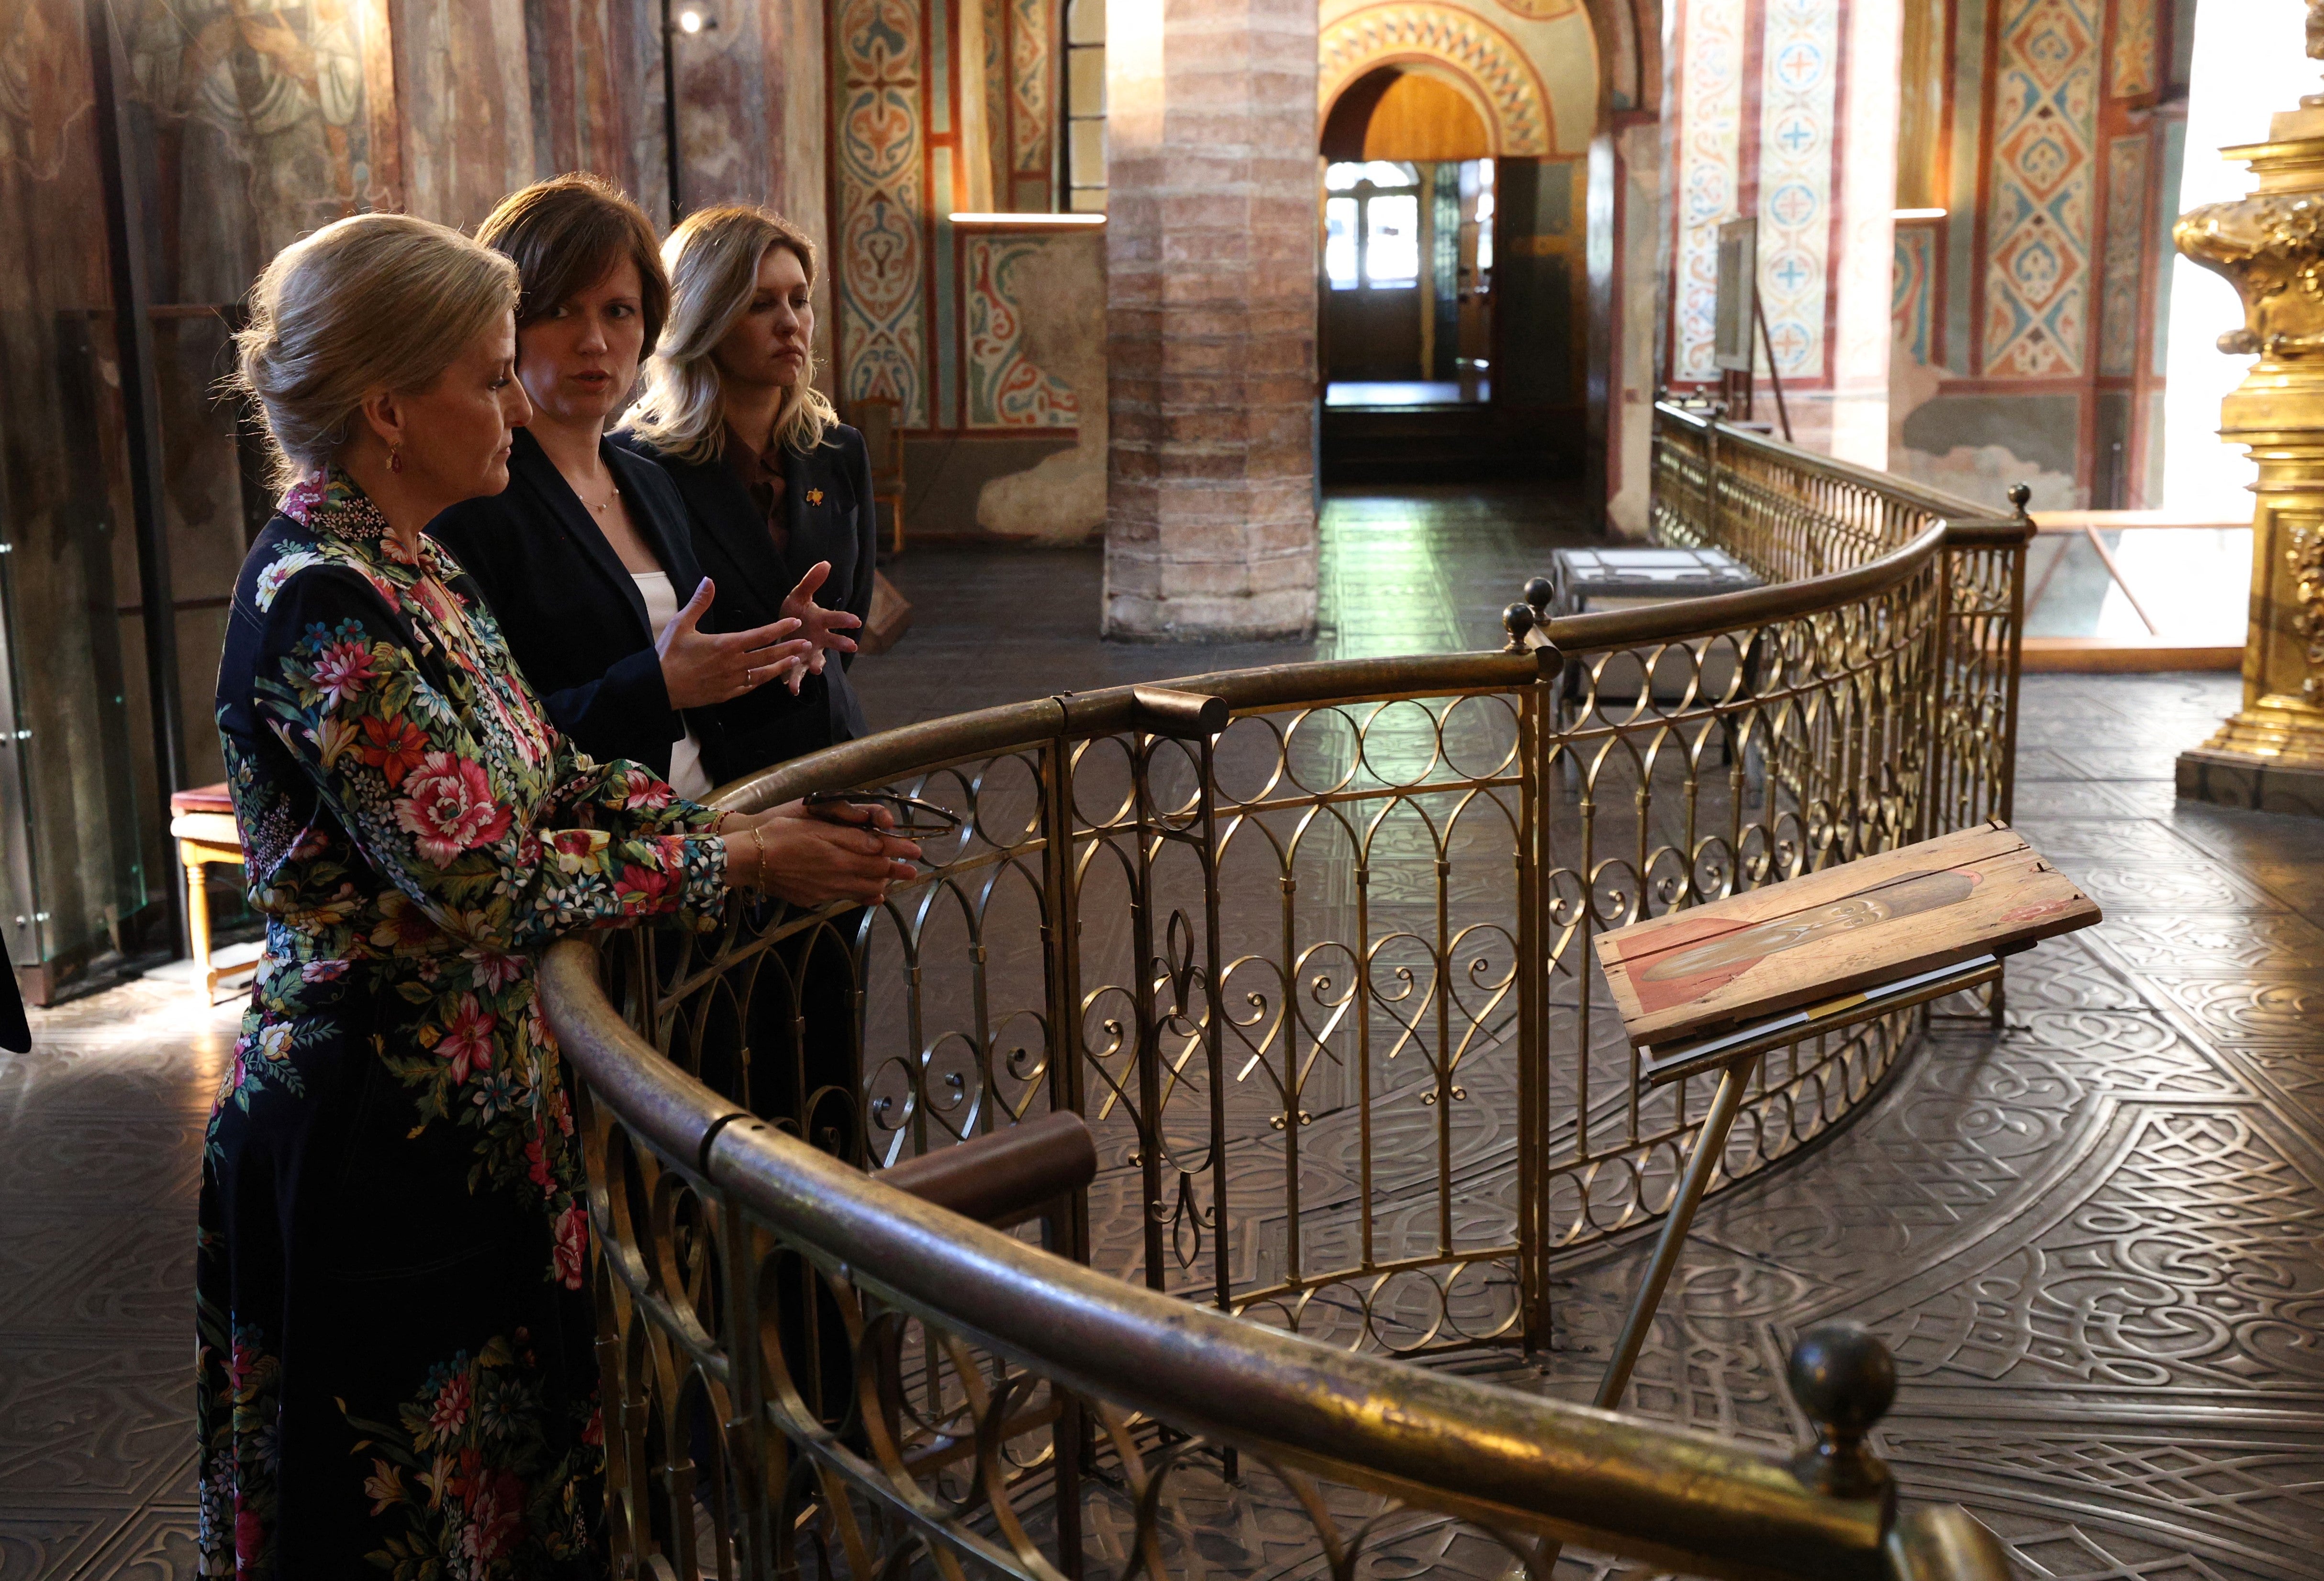 Sophie, left, and the first lady of Ukraine Olena Zelenska inside the Saint Sophia Cathedral in Kyiv